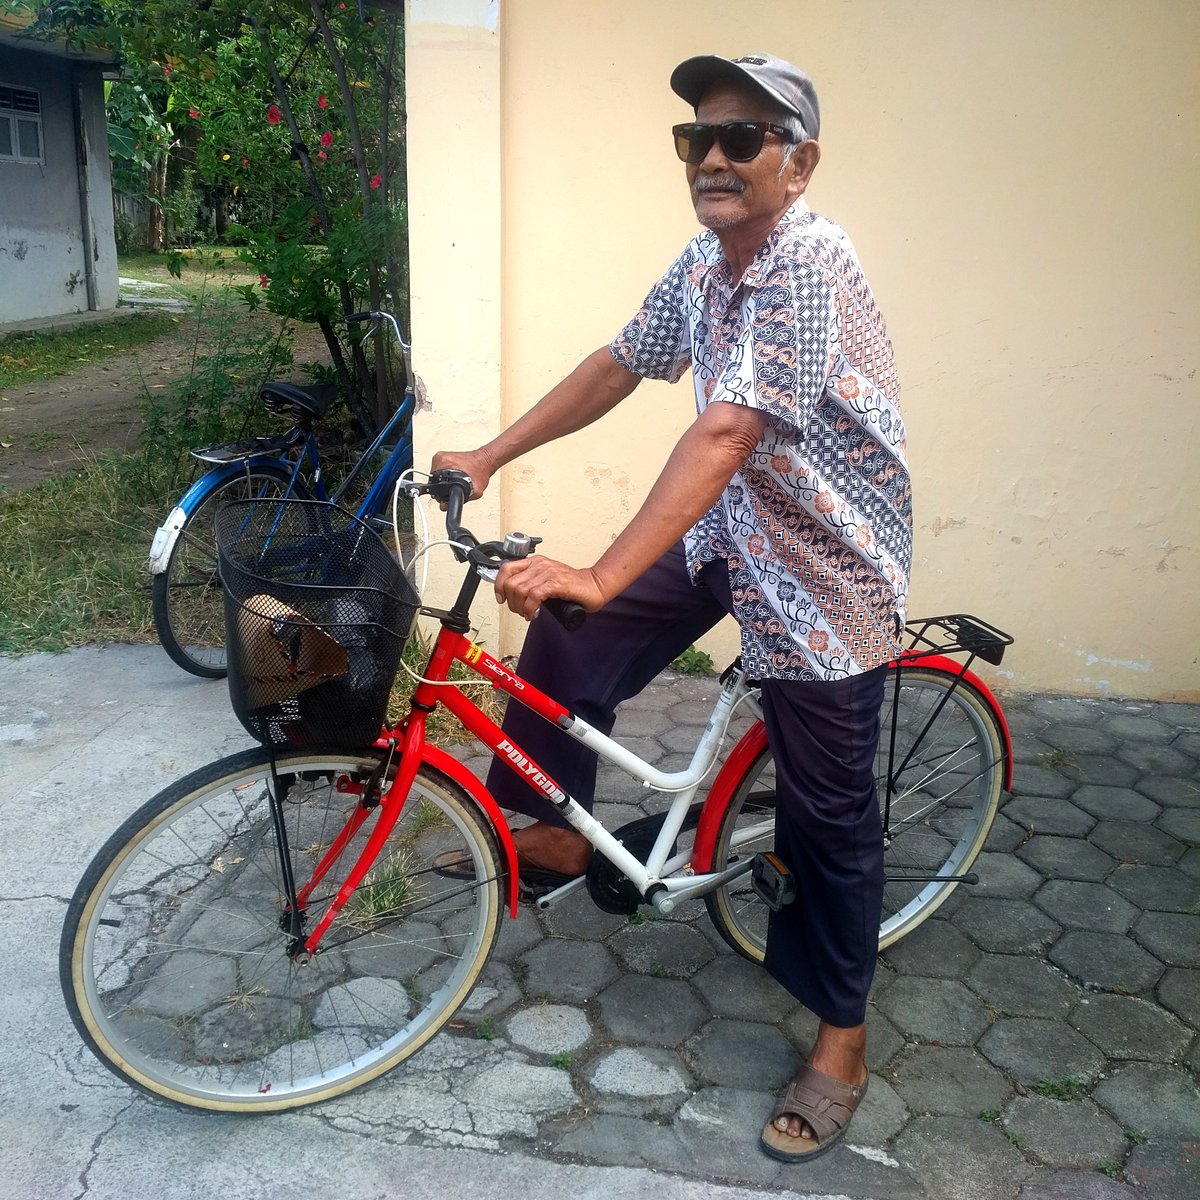 This is Sunaryo. He was a full member of the Partai Komunis Indonesia, the world's largest communist party outside of the USSR and China. In 1965, his friends were killed and he was imprisoned. Here he is, now 75 years old, ready to ride home after one of our many interviews